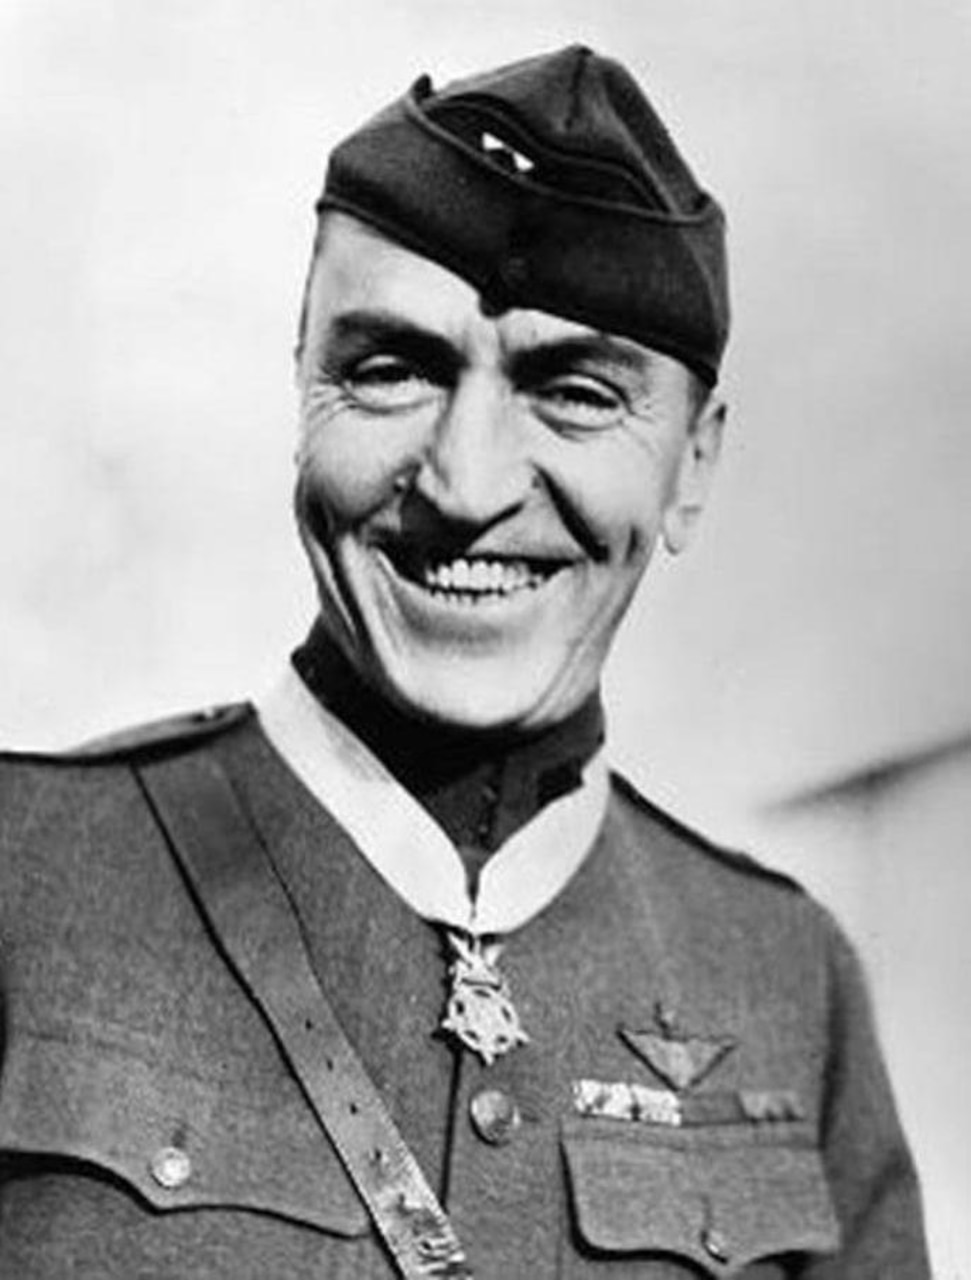 A smiling soldier poses for a photo while wearing the Medal of Honor.